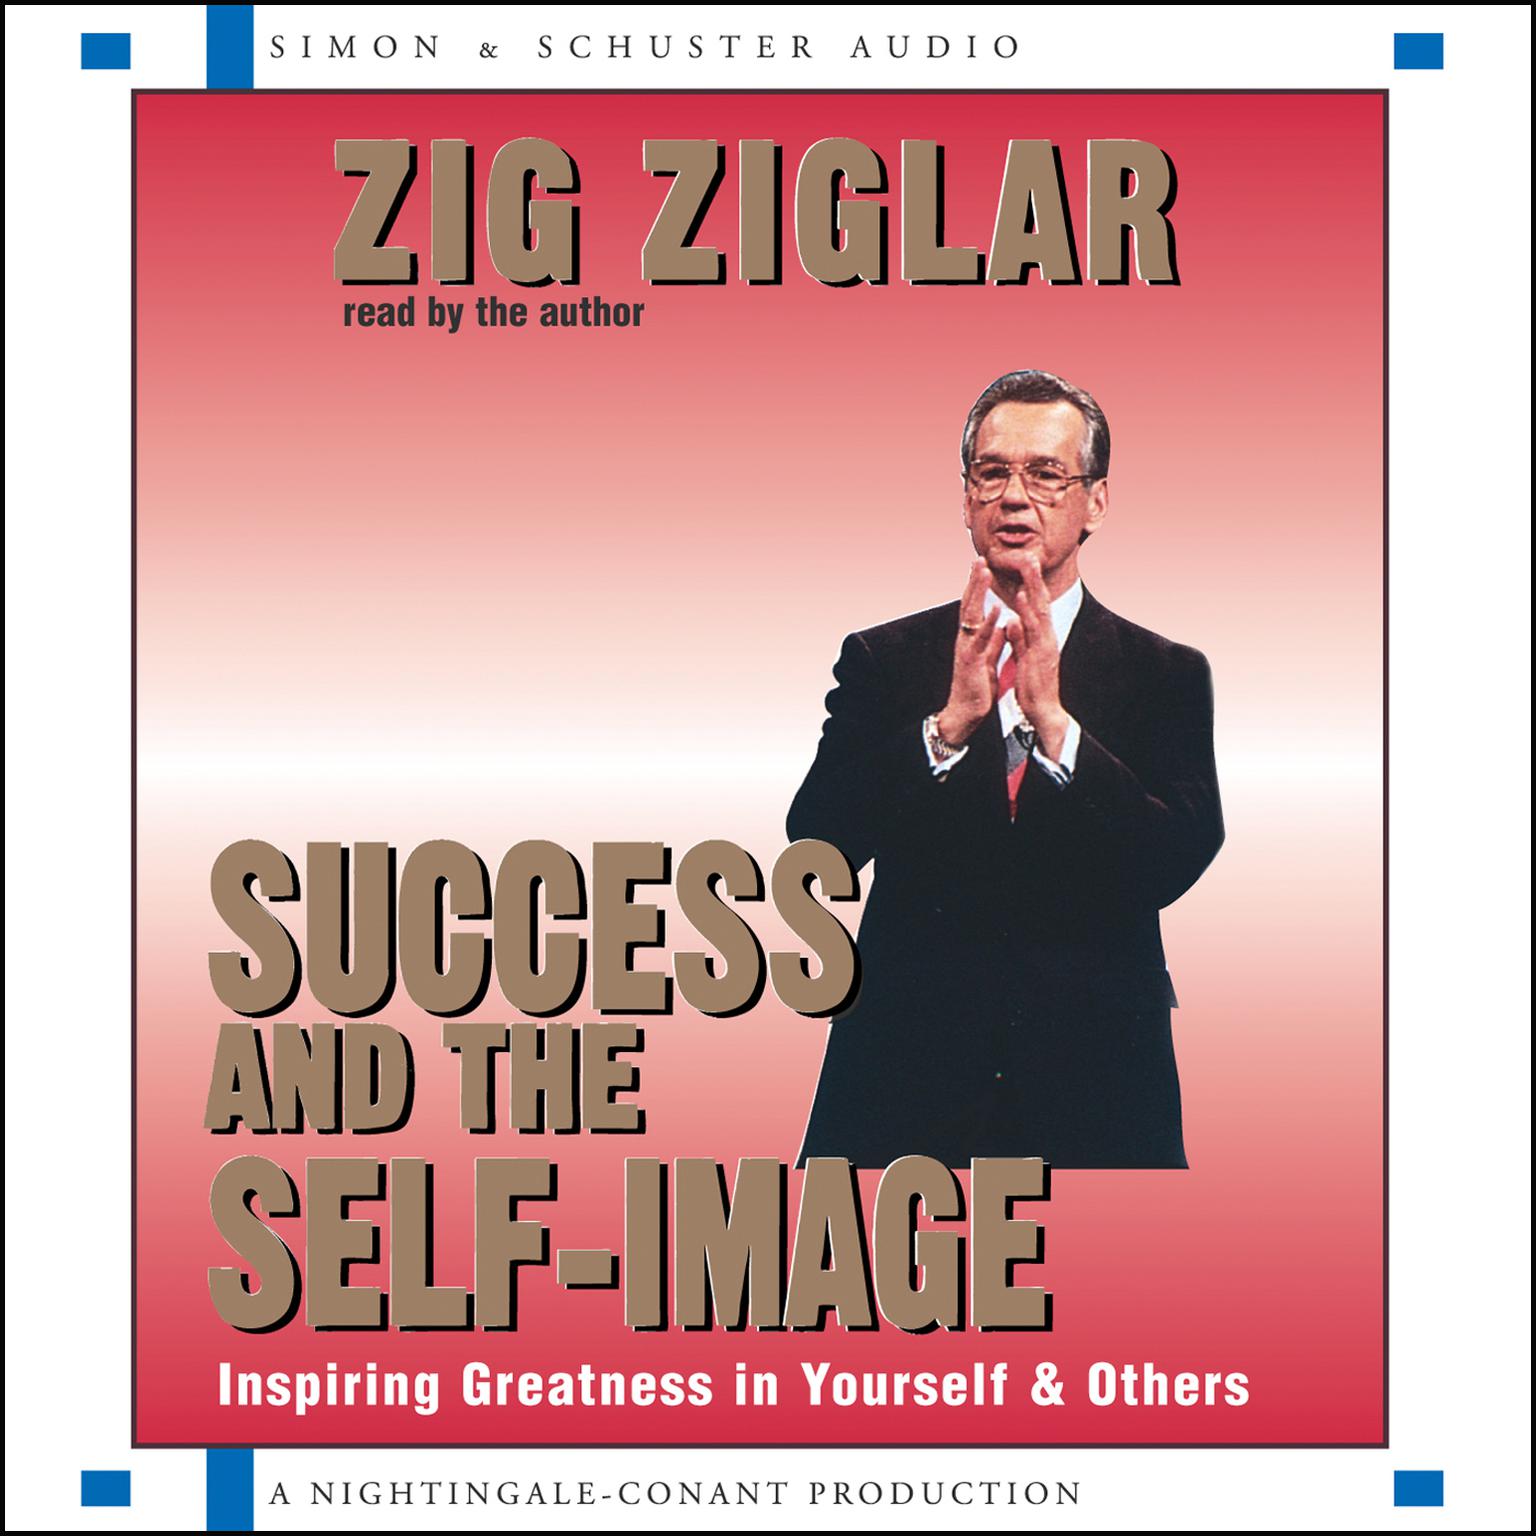 Success and the Self-Image (Abridged): Inspiring Greatness in Yourself and Others Audiobook, by Zig Ziglar